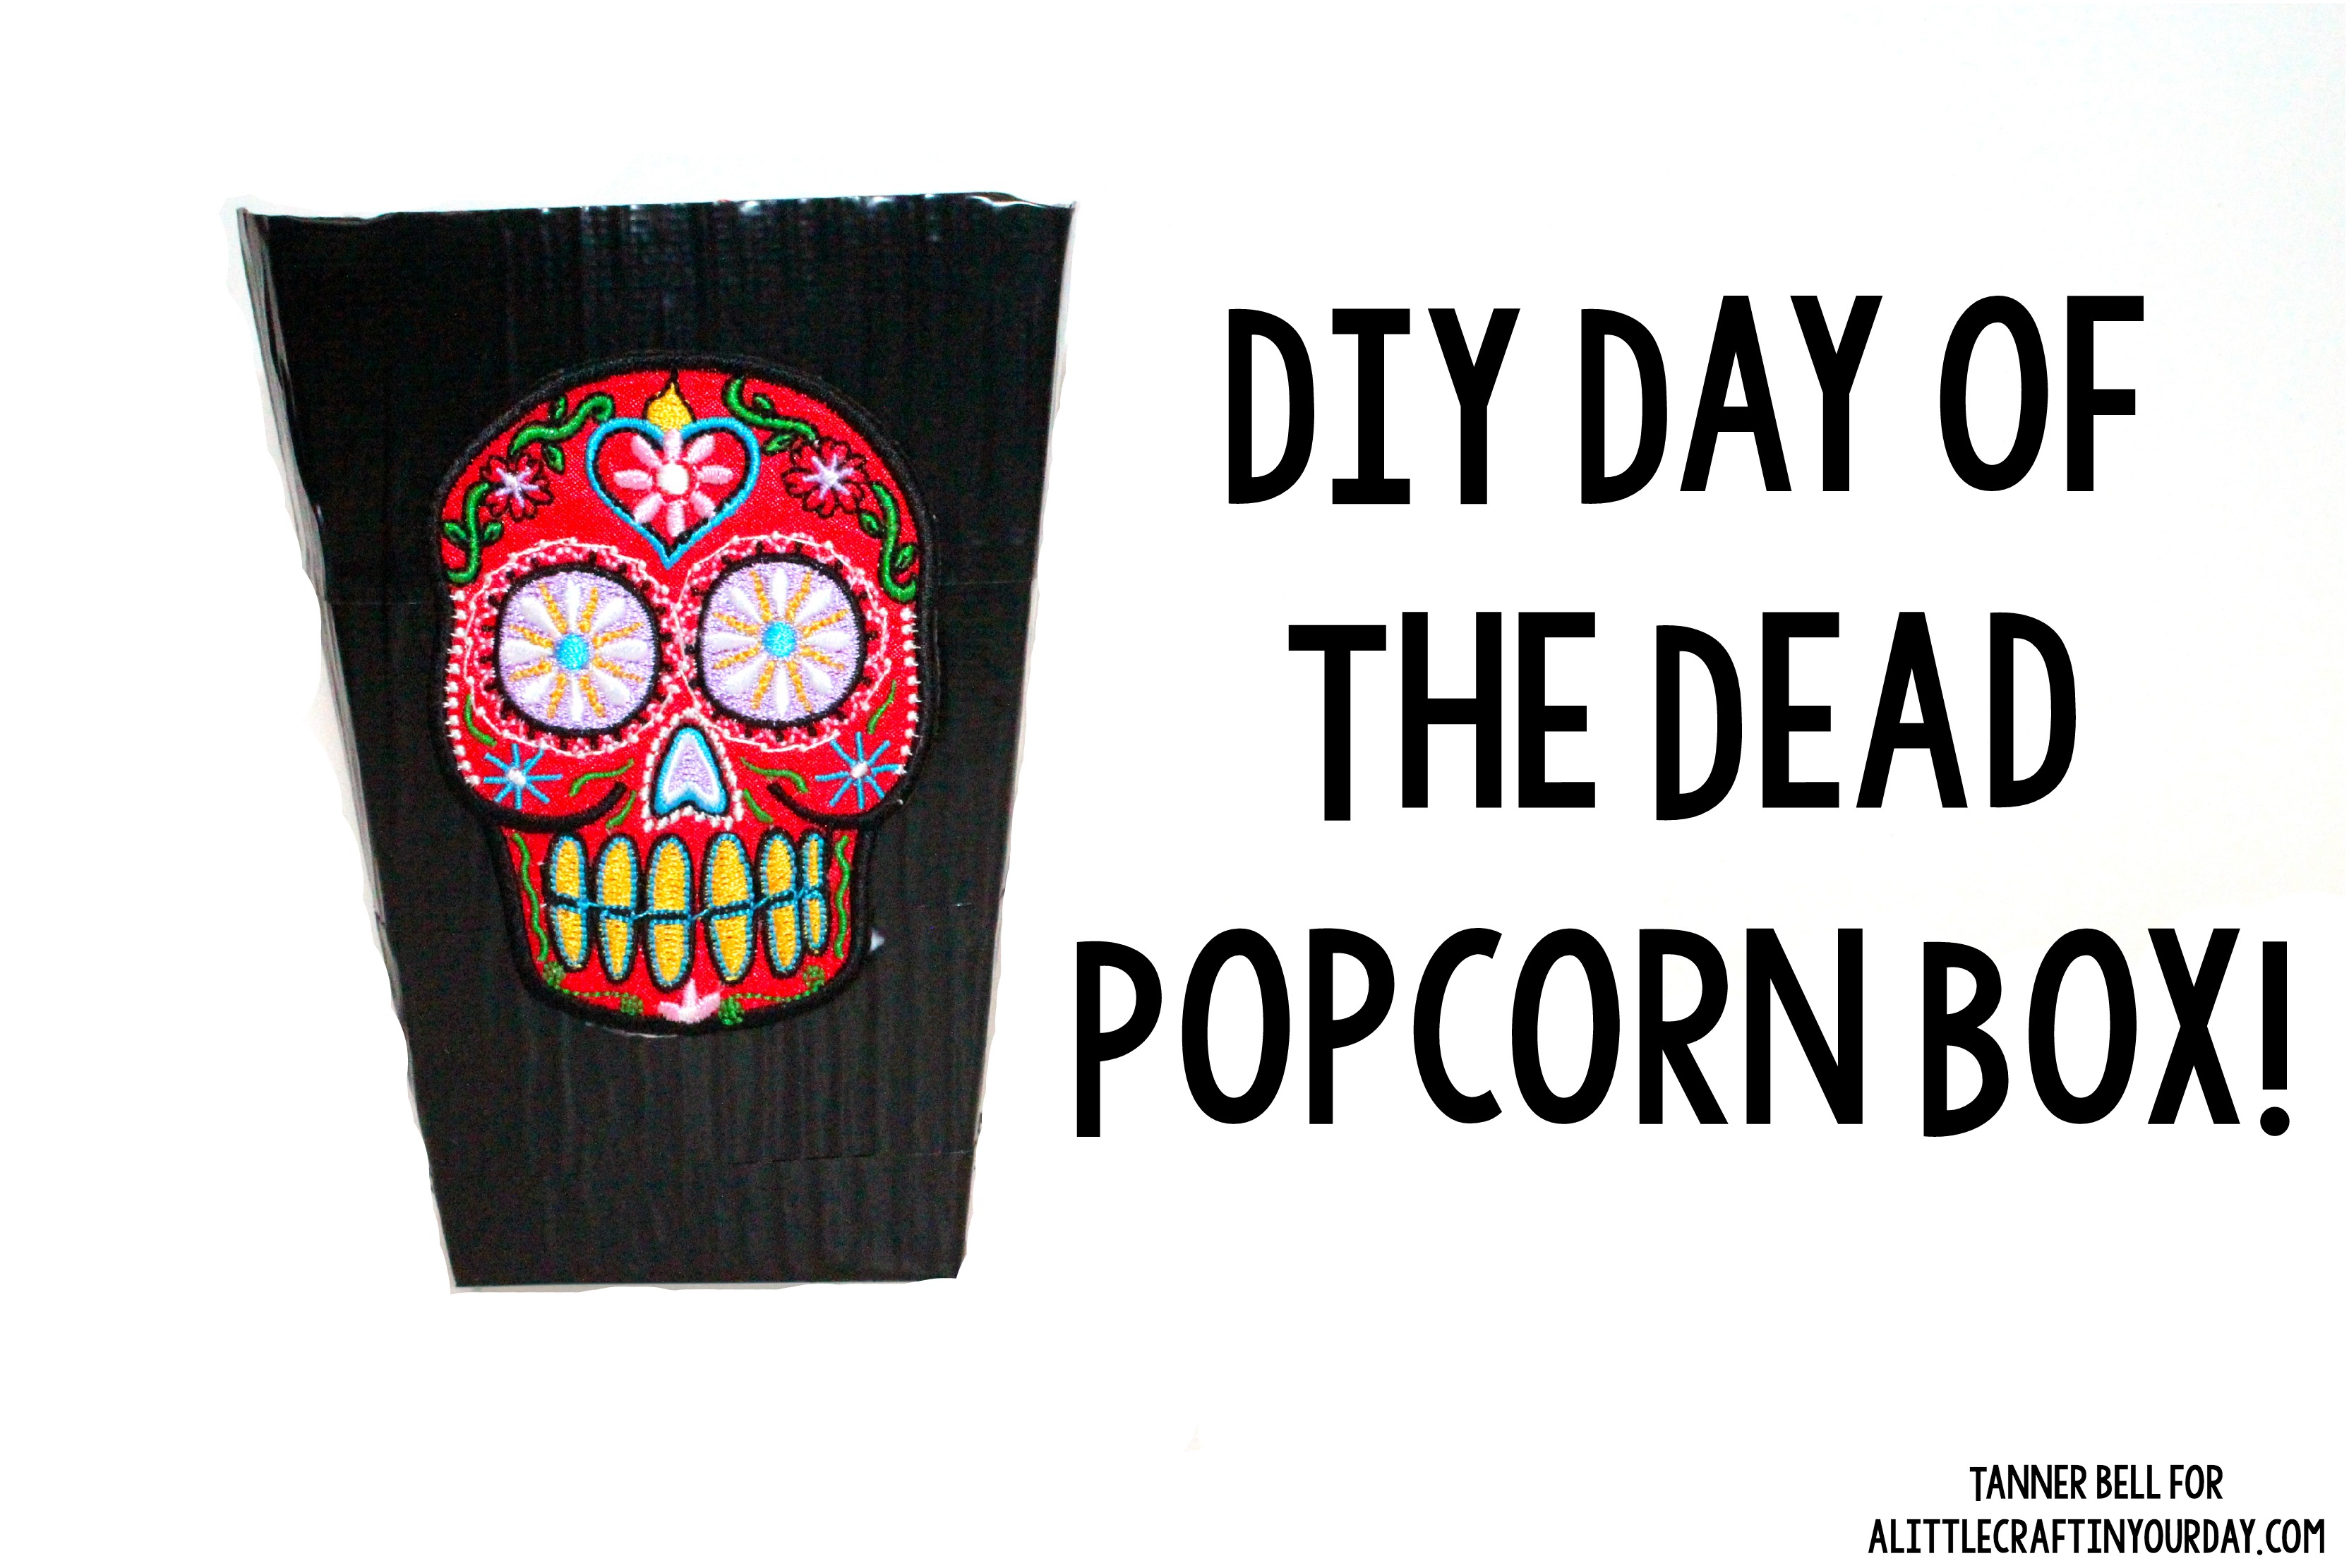 DIY-day-of-the-dead